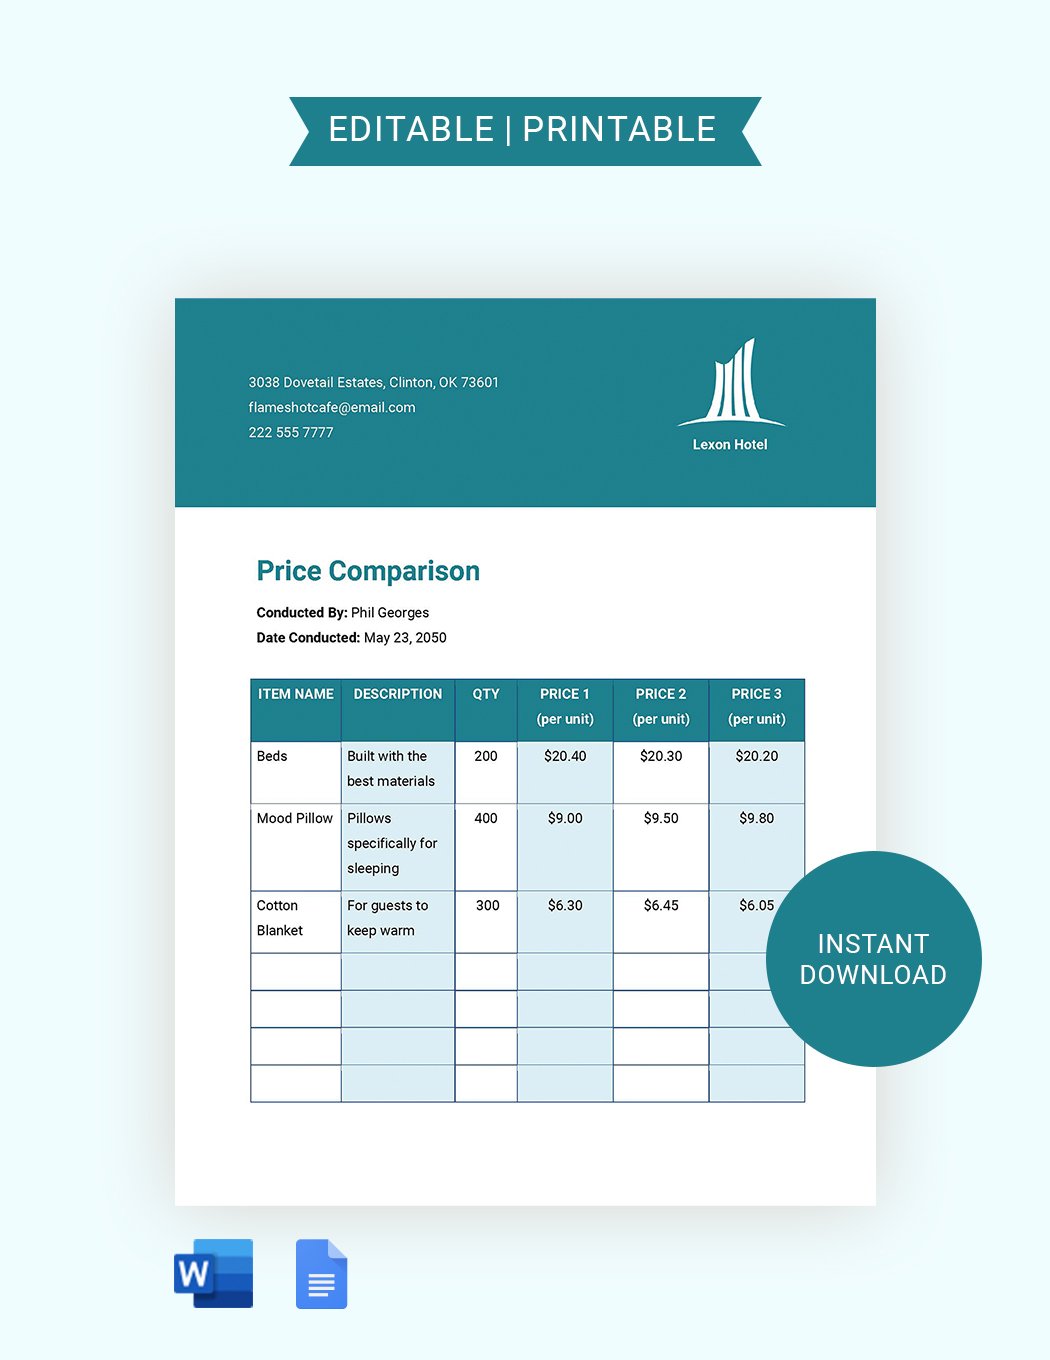 Hotel Price Comparison Template in Word, Google Docs